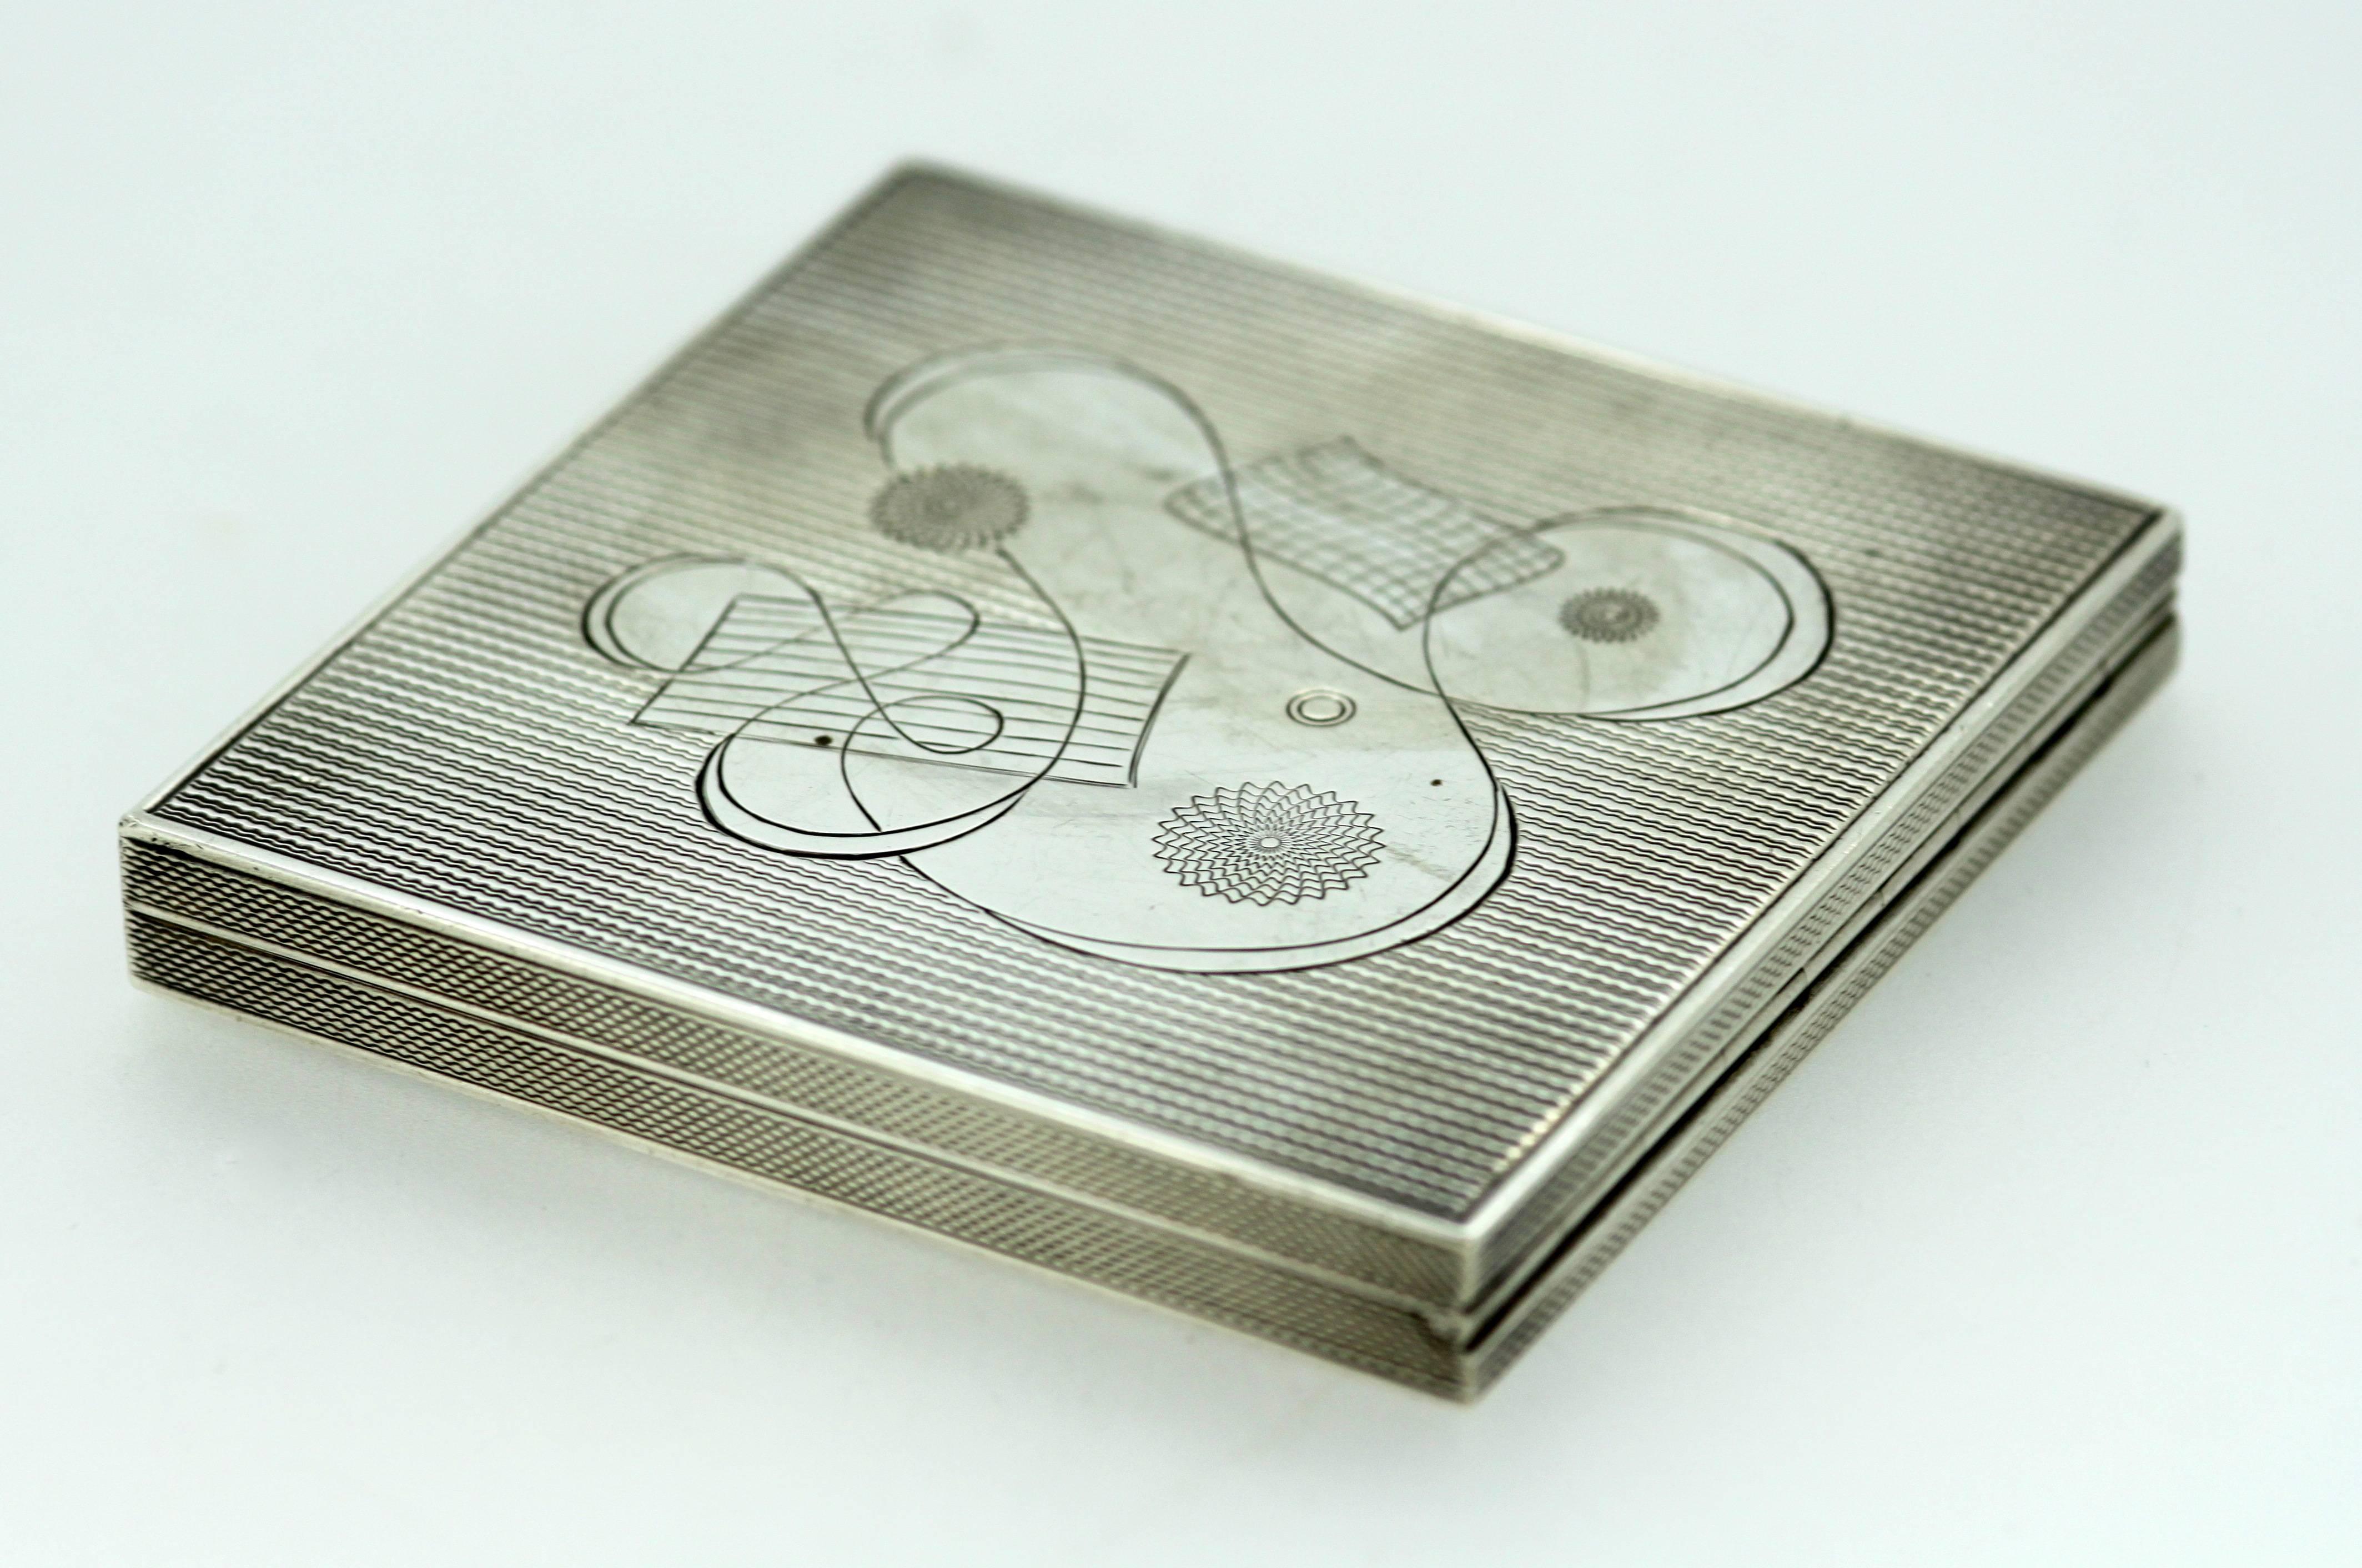 British Silver Ladies Compact Box With Decorative Engravings, E Silver & Co, London 1951